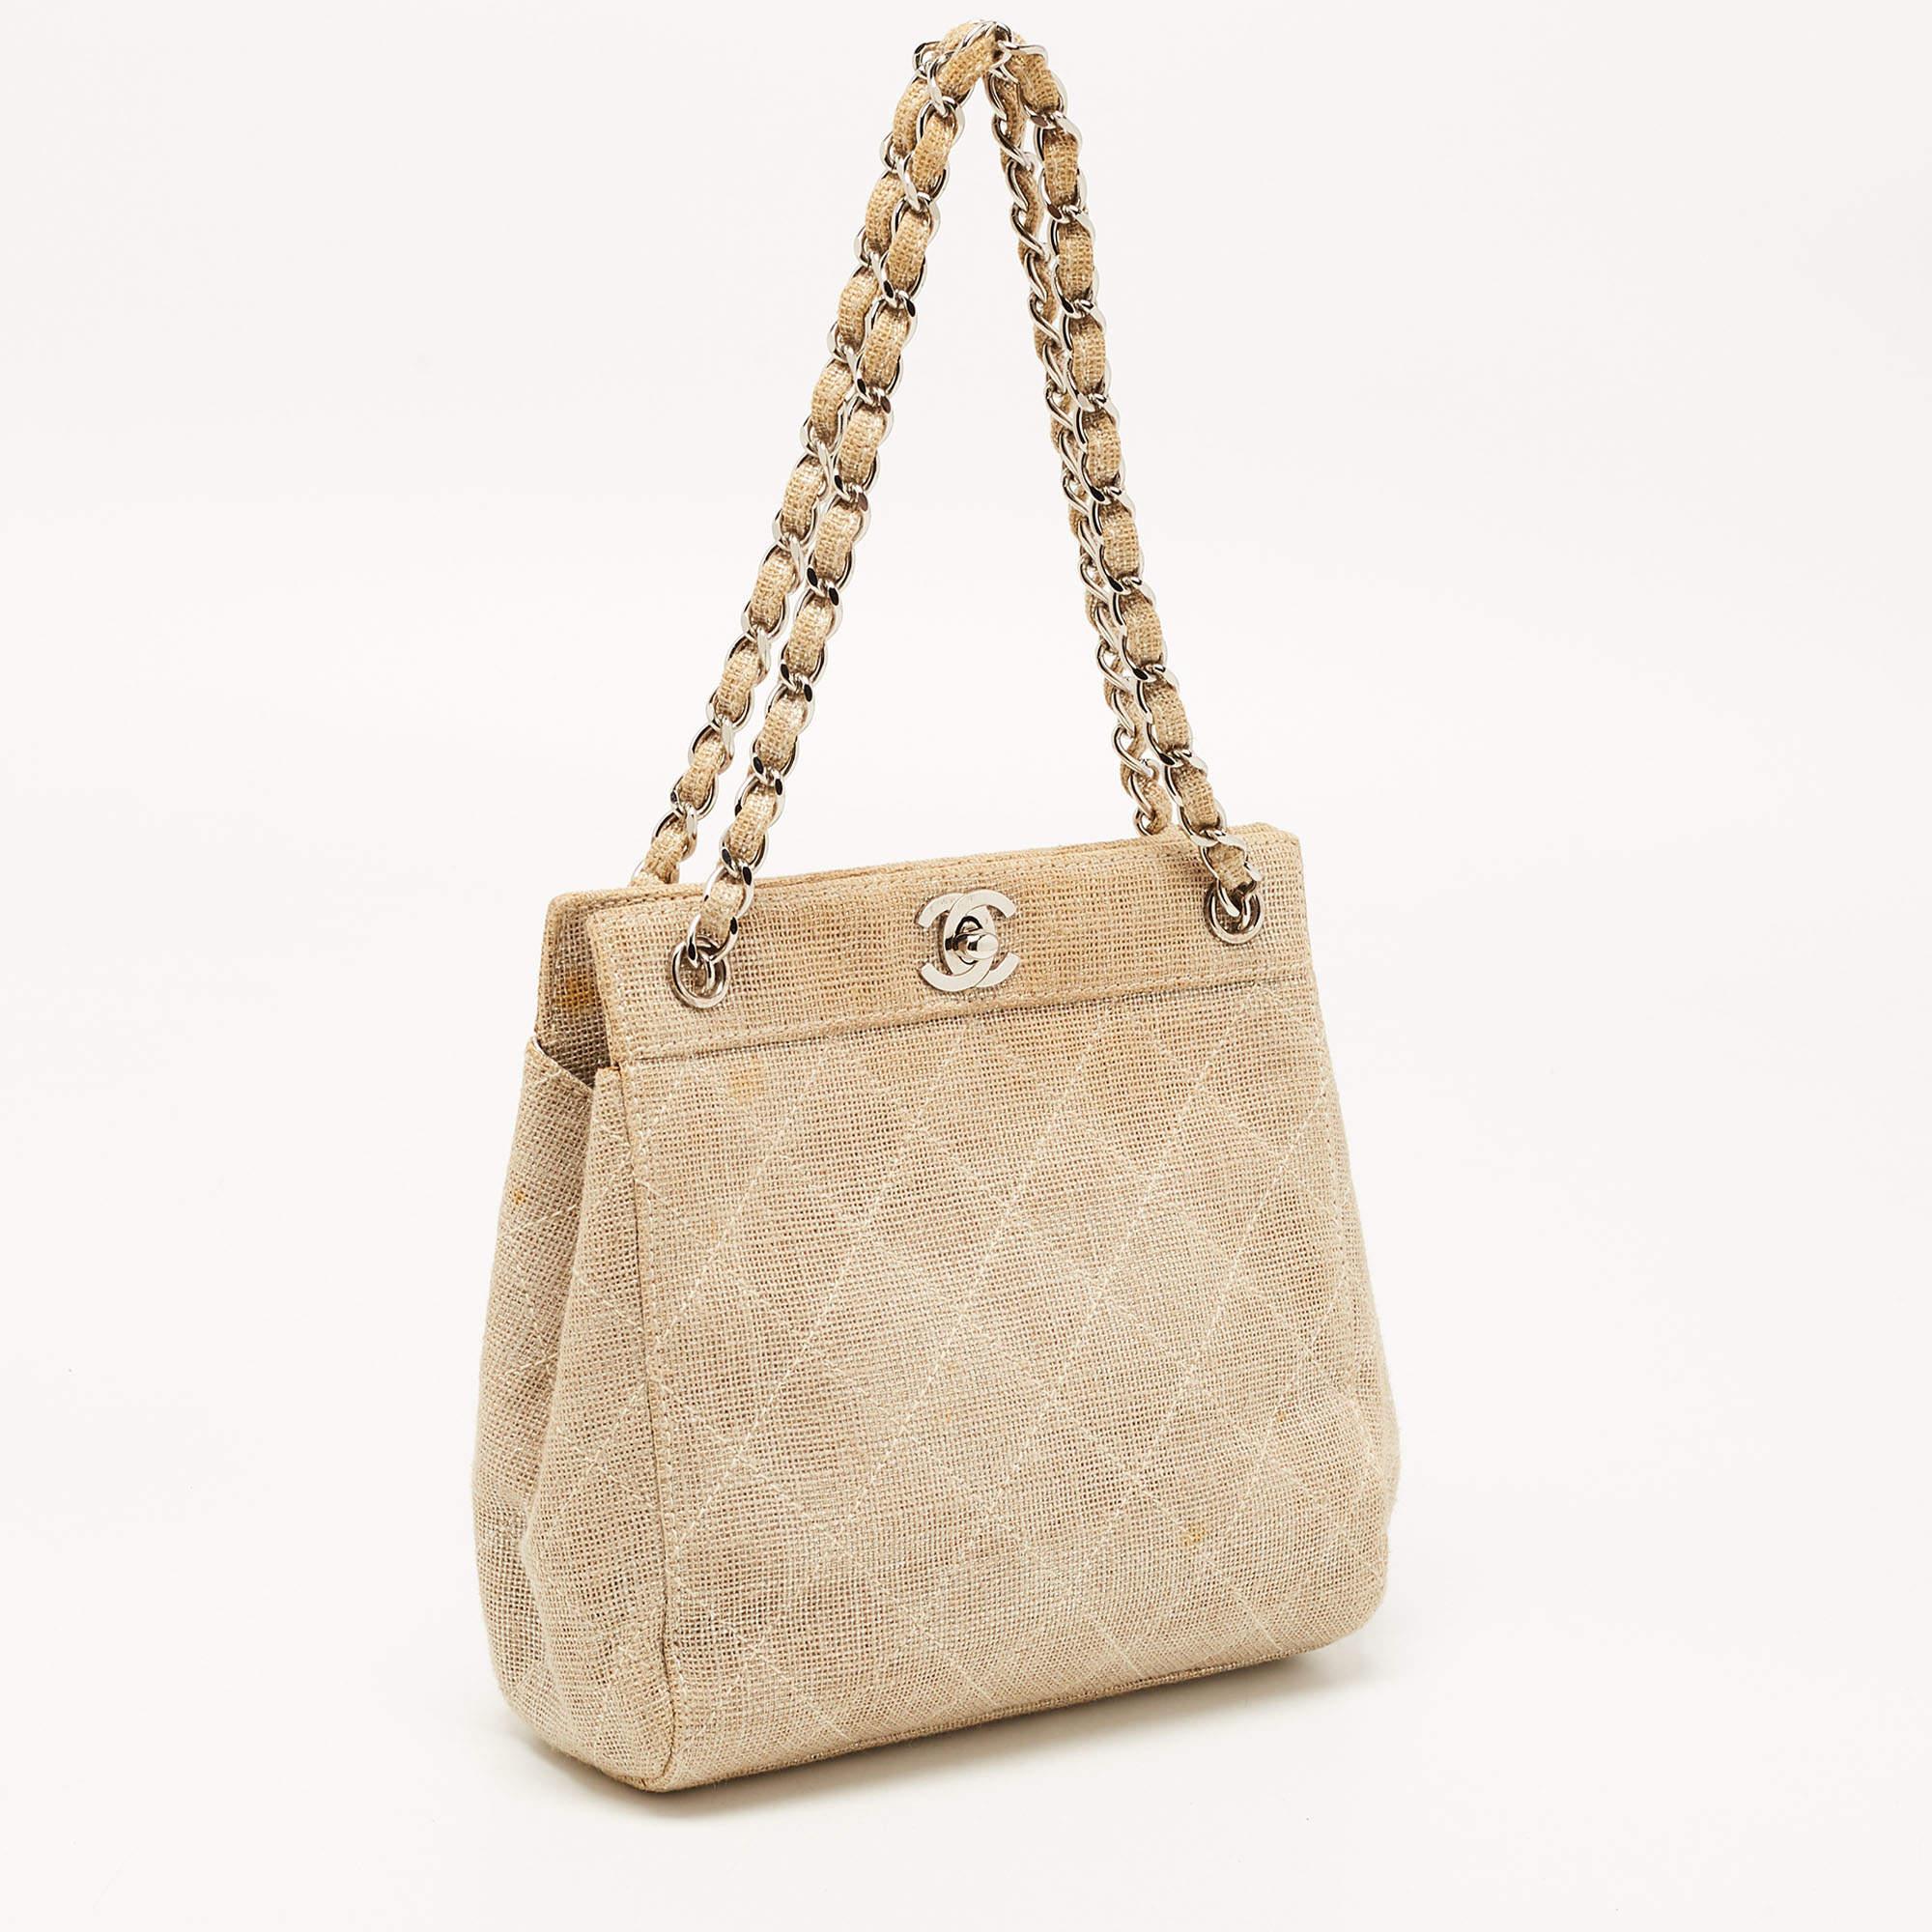 Women's Chanel Metallic Beige Quilted Canvas Mini Classic Chain Tote